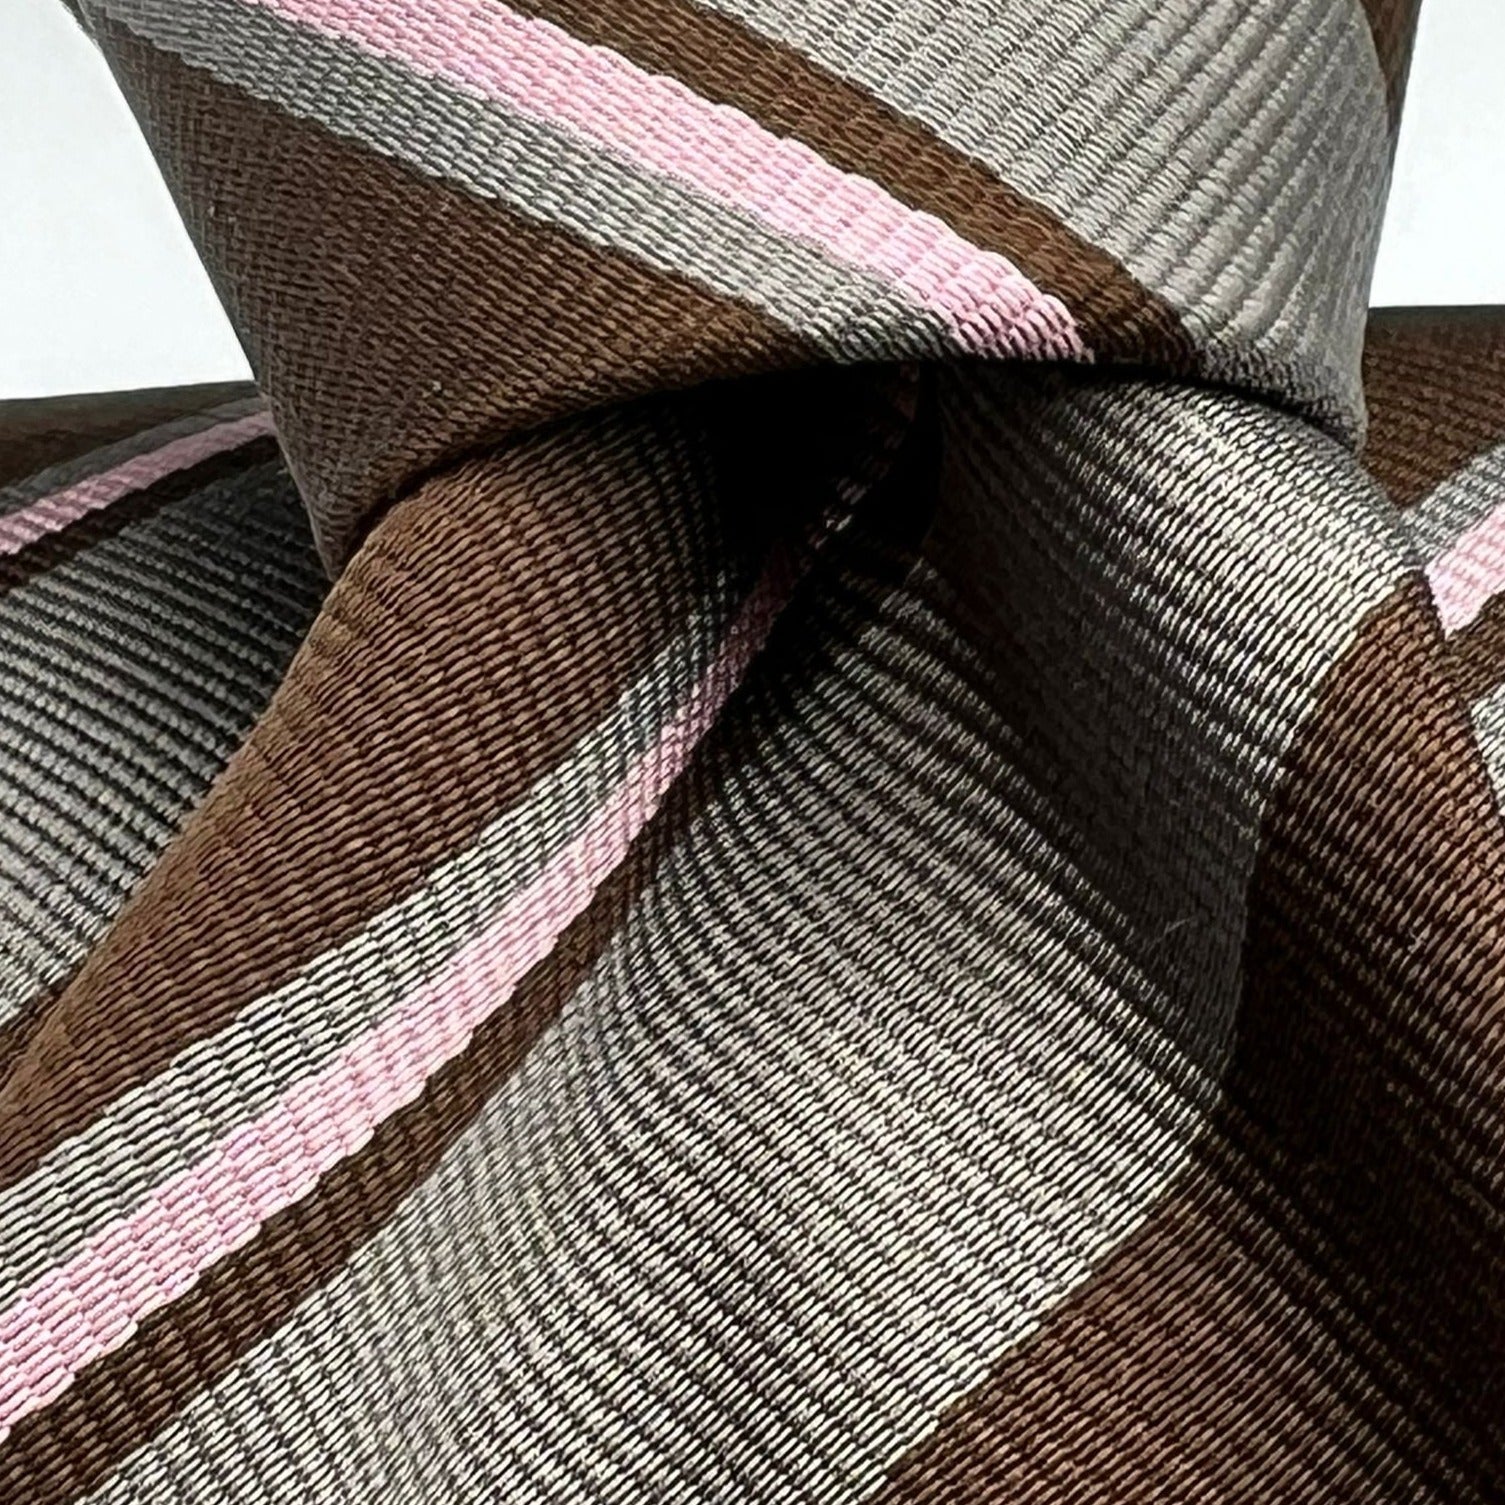 Drake's for Cruciani e Bella 100%  Woven Silk Tipped Brown, Grey and Pink Stripes Handmade in London, England 8 cm x 150 cm #5337